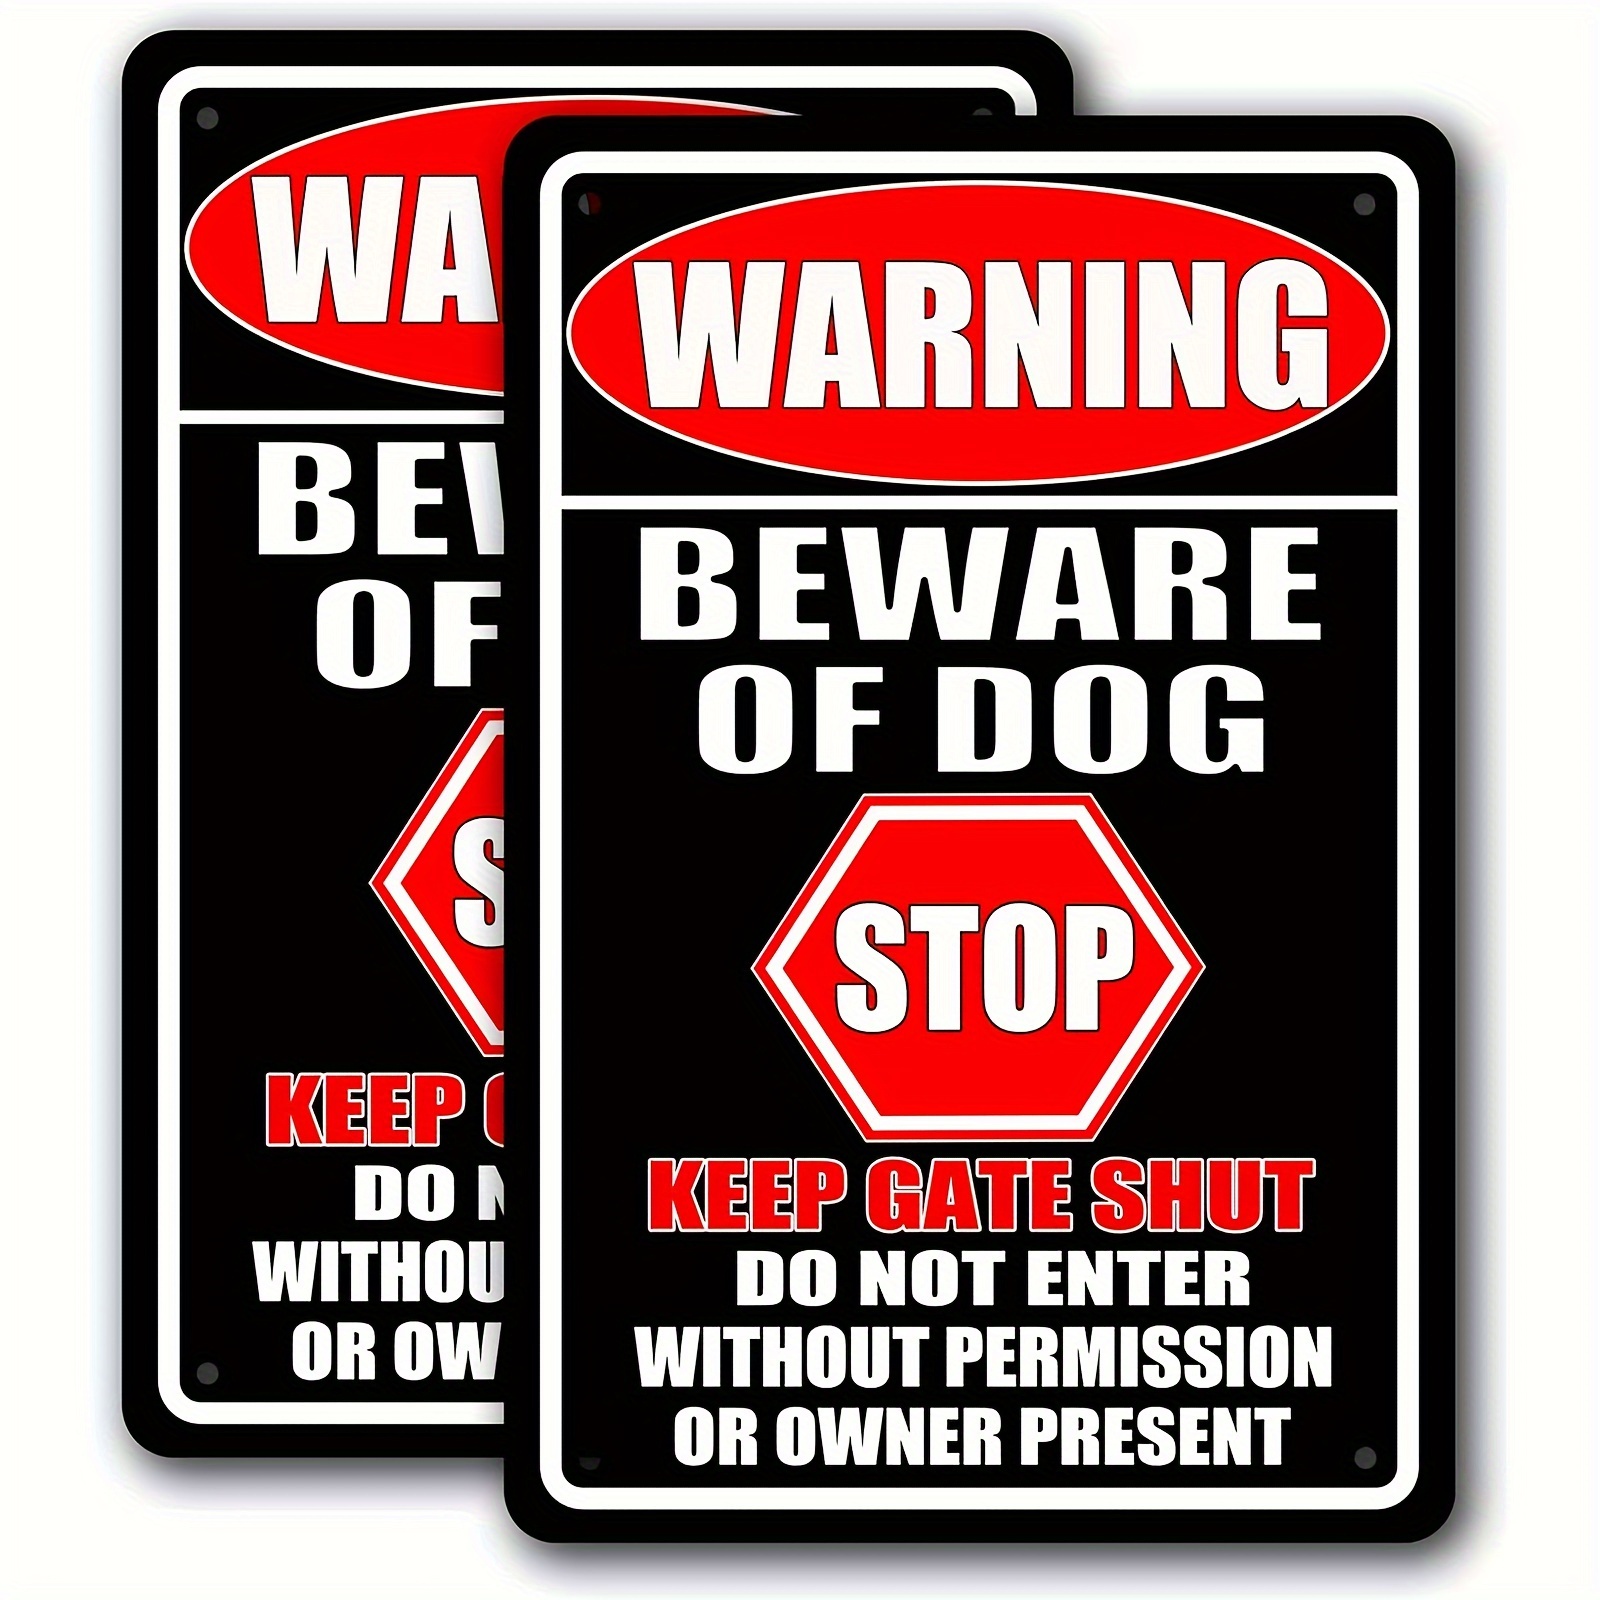 

2pcs Beware Of Dog Signs For Fence Beware Of Dog Tin Sign Dogs Decor Security Metal Signs Garden Warning For Yard Stop Keep Do Not Enter Without Permission Or Owner Present Sign 8x12in Tin Sgins